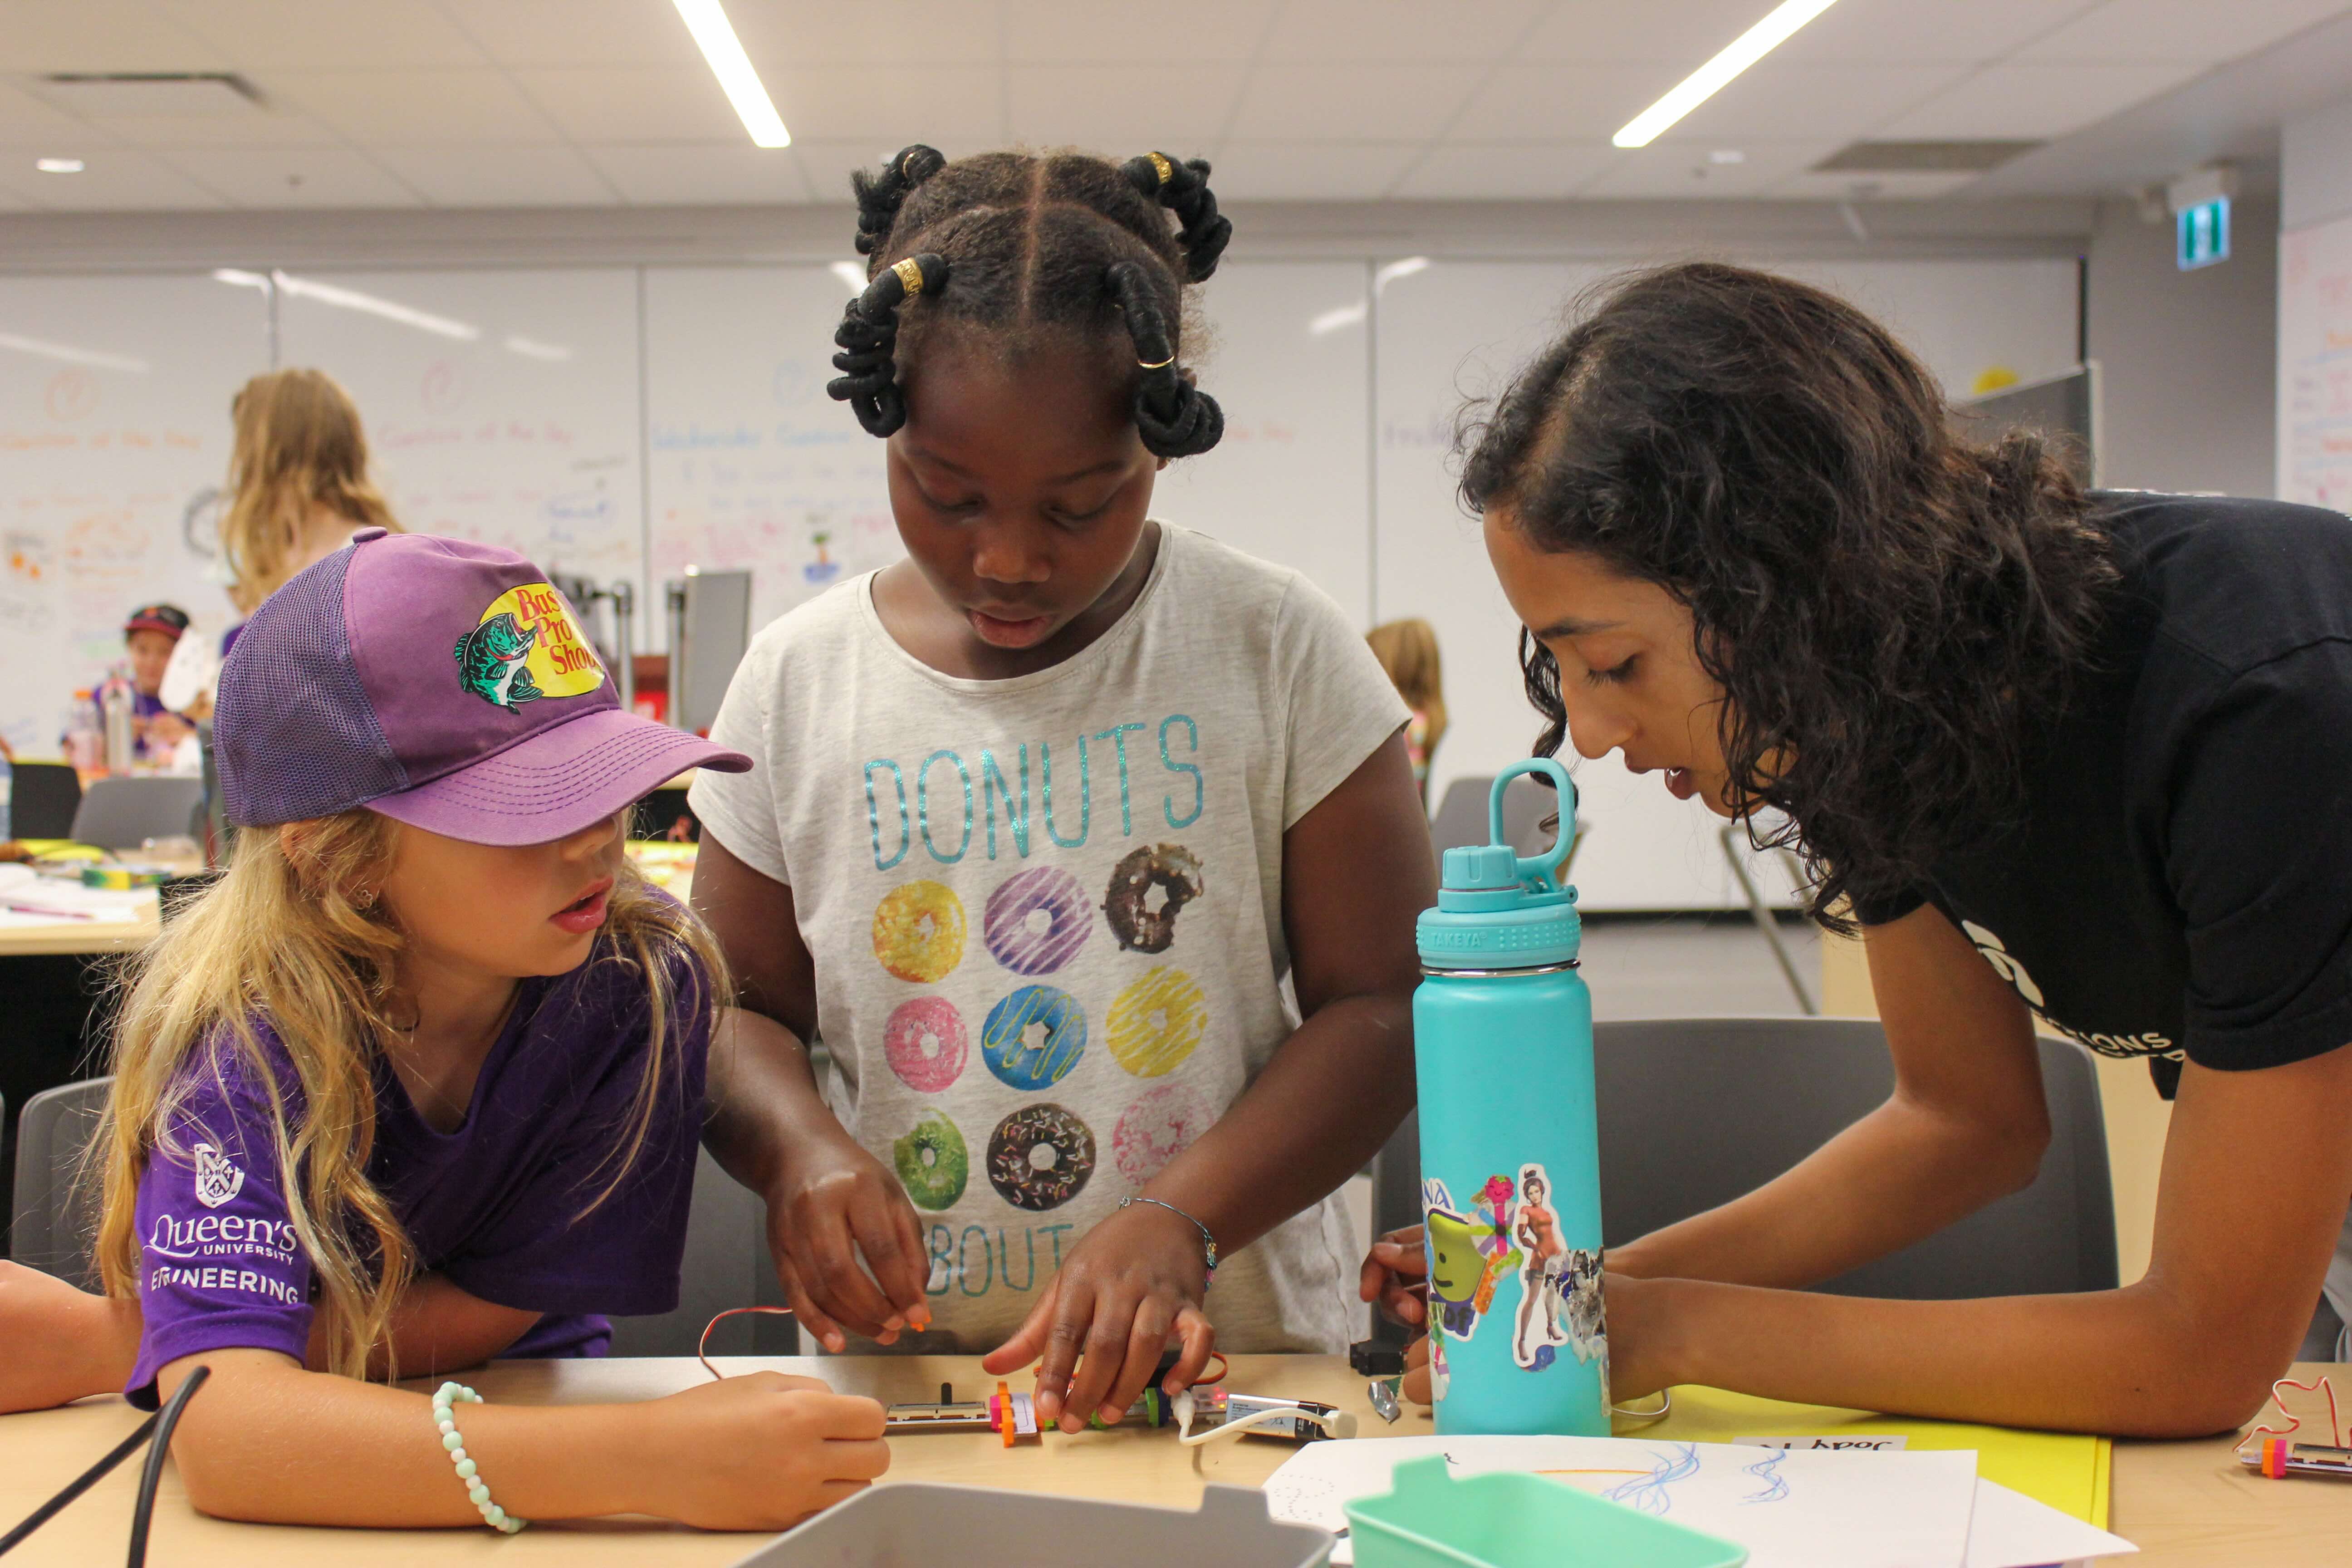 Female students working with littlebits technology